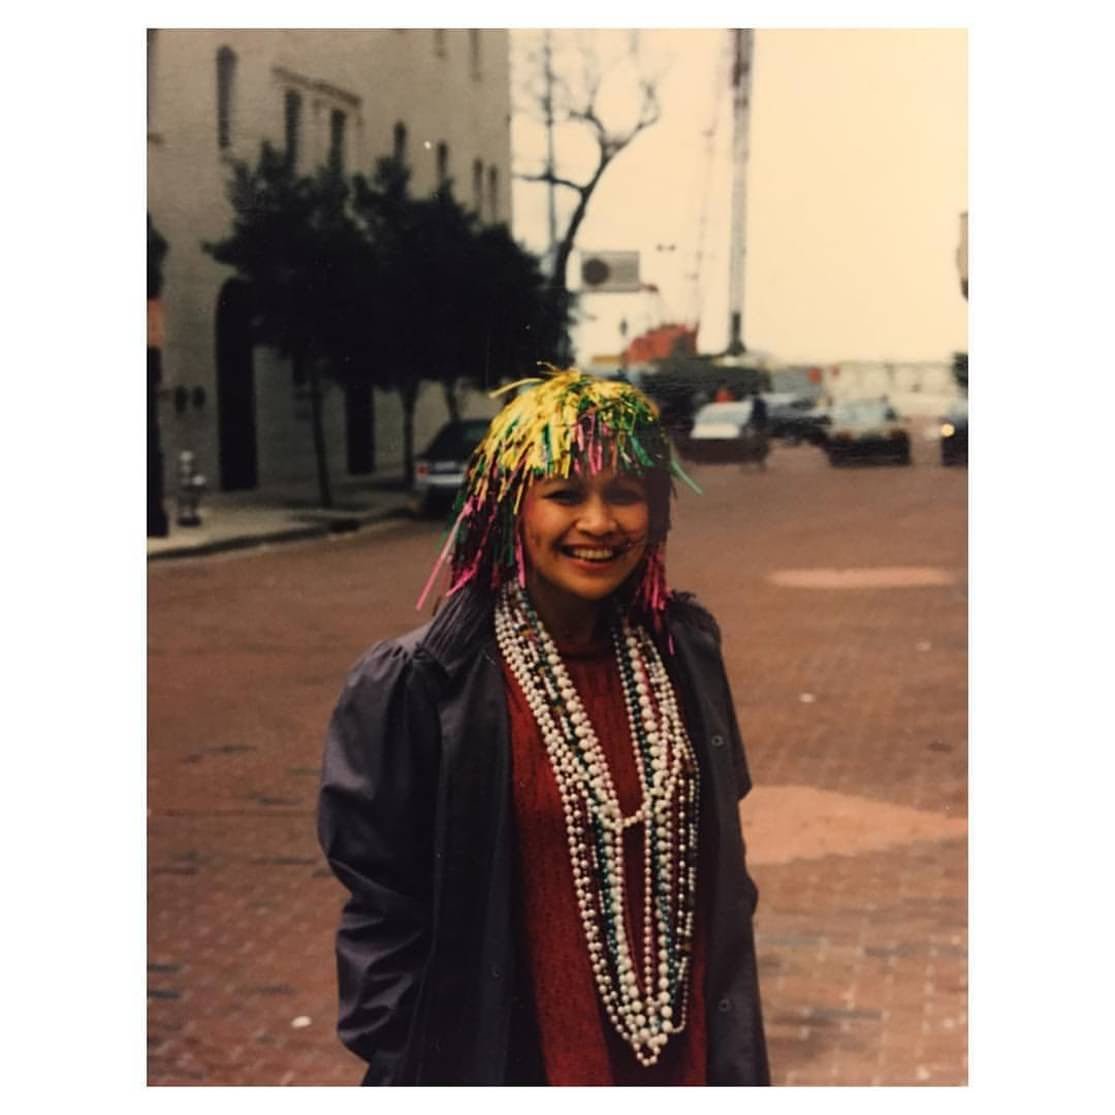 Mardi Gras Marlo - the life of the party.

I don&rsquo;t always get a long with her, but a lot of who I am is bc of her. 

She moved to US as a child in the 60s, a time where one was encouraged to &ldquo;assimilate.&rdquo; Effectively, her culture wa